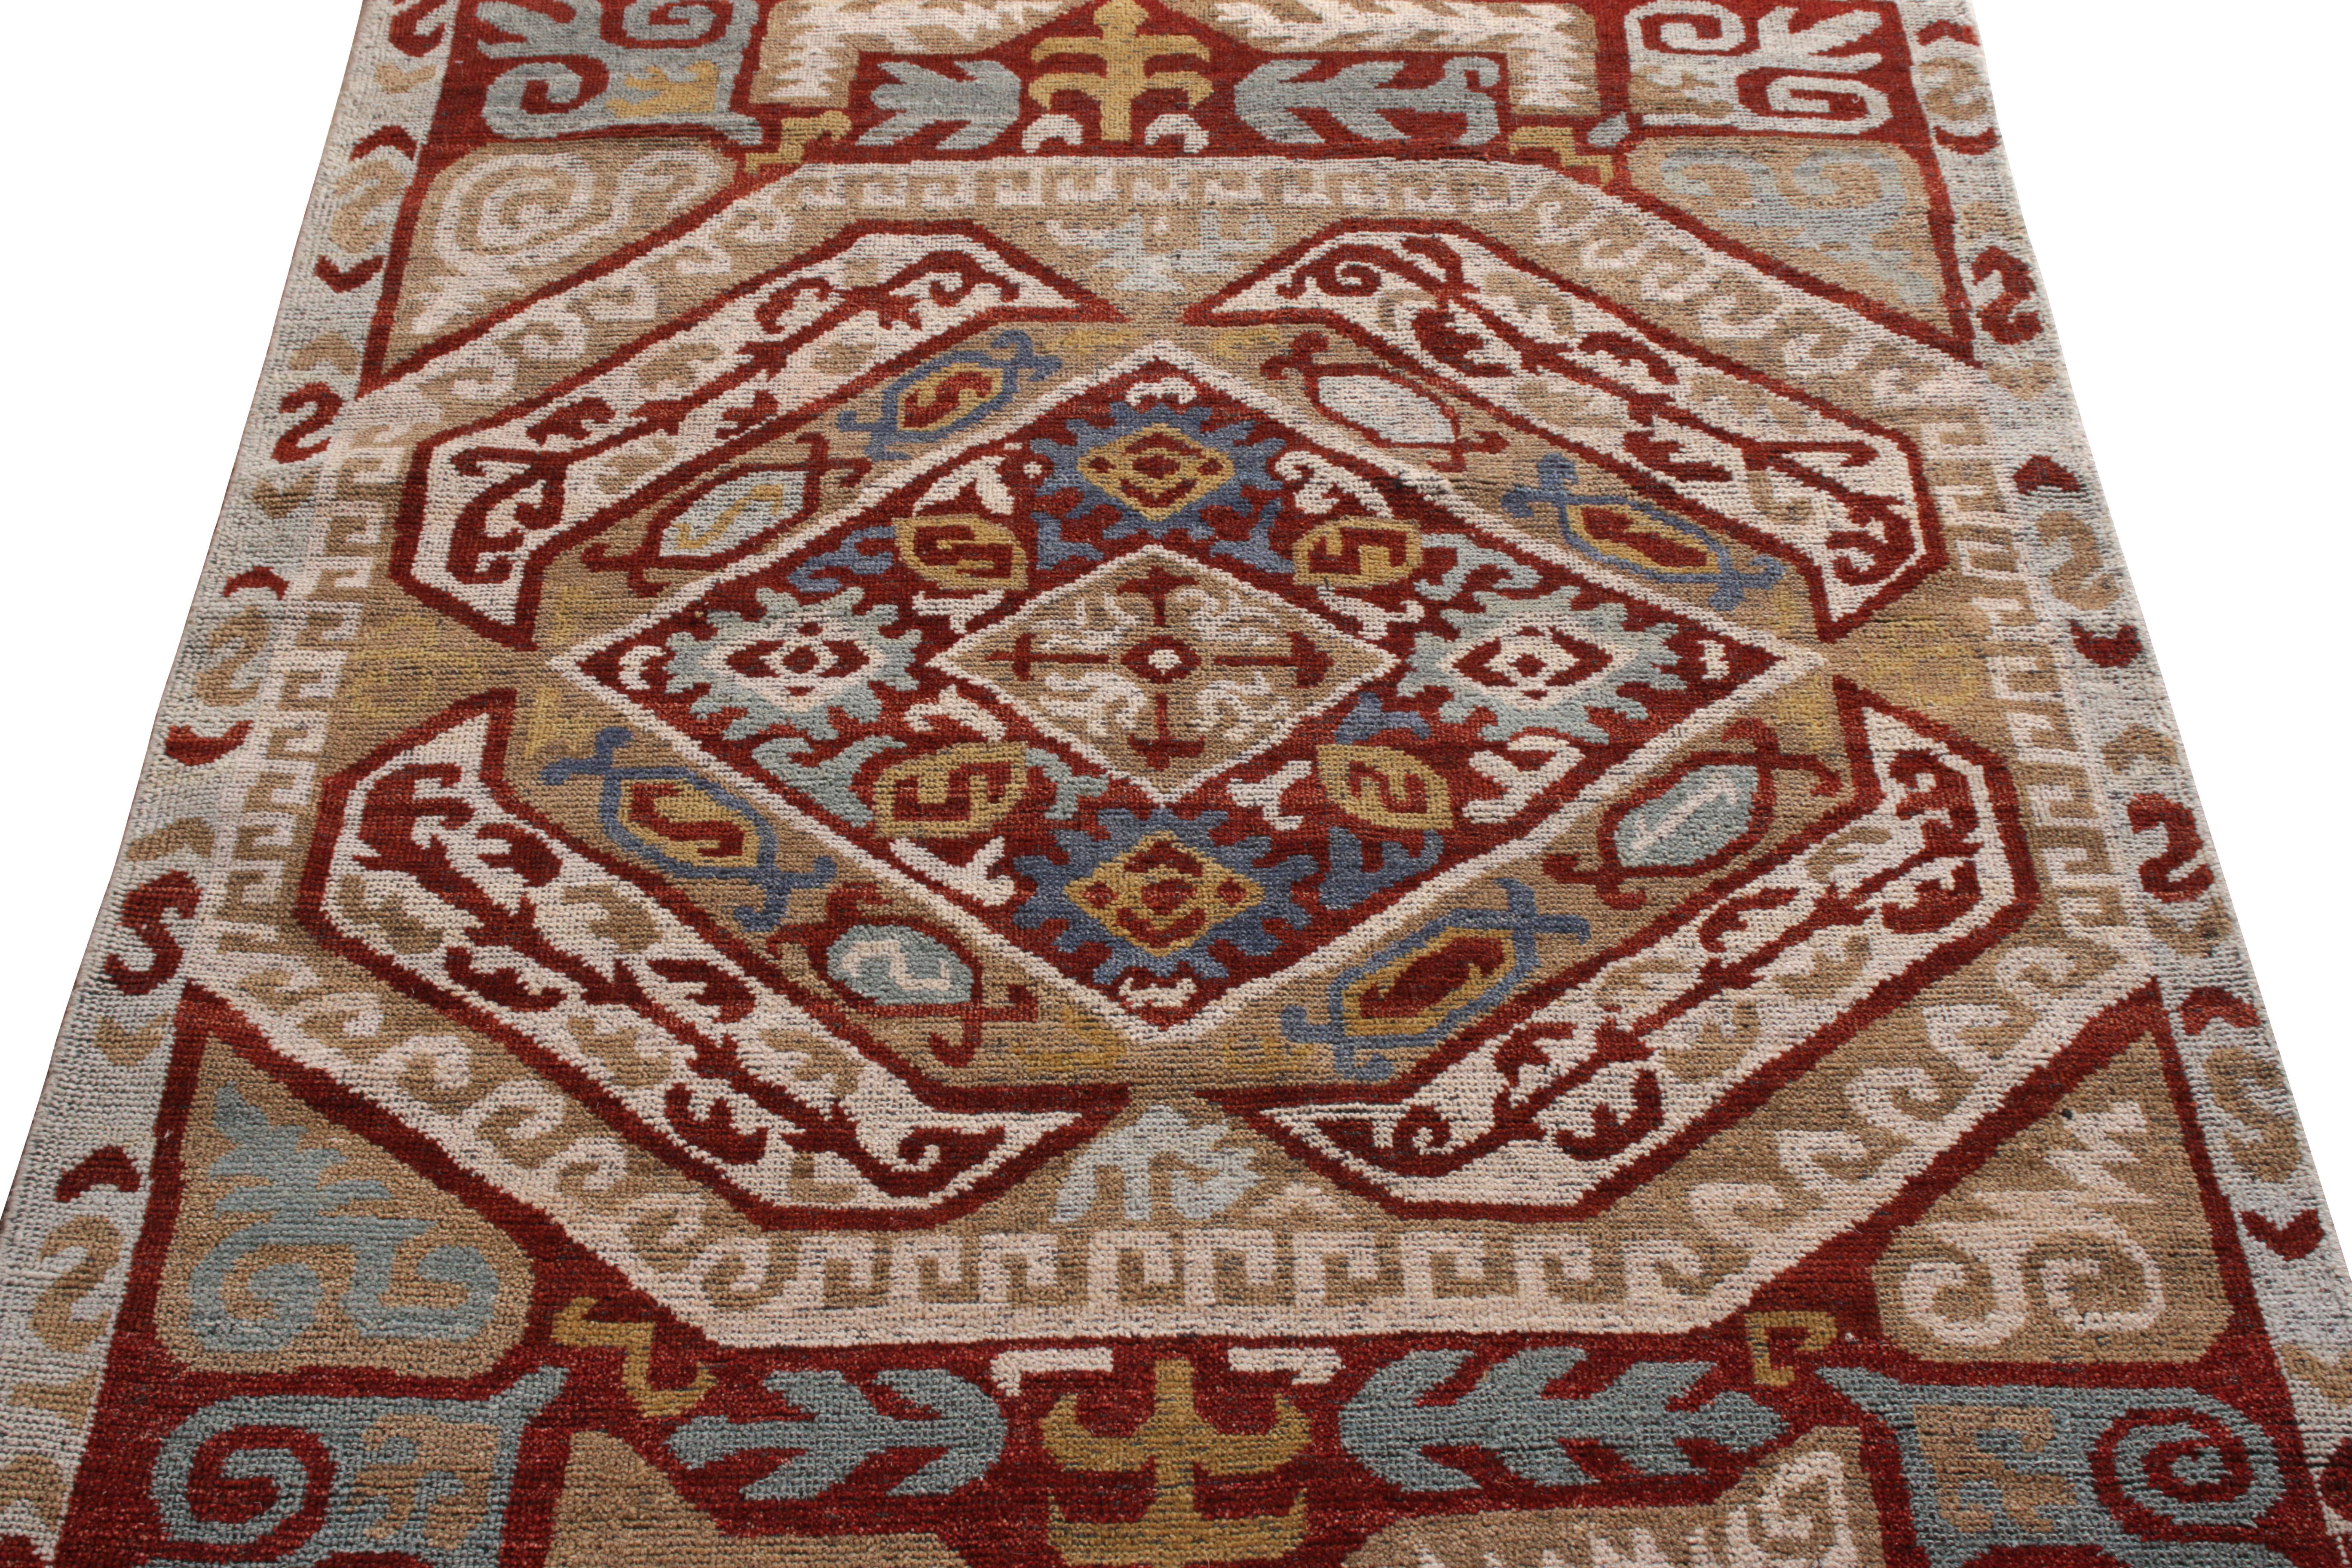 Other Rug & Kilim’s Classic Style Rug in Beige-Brown and Red Tribal Pattern For Sale